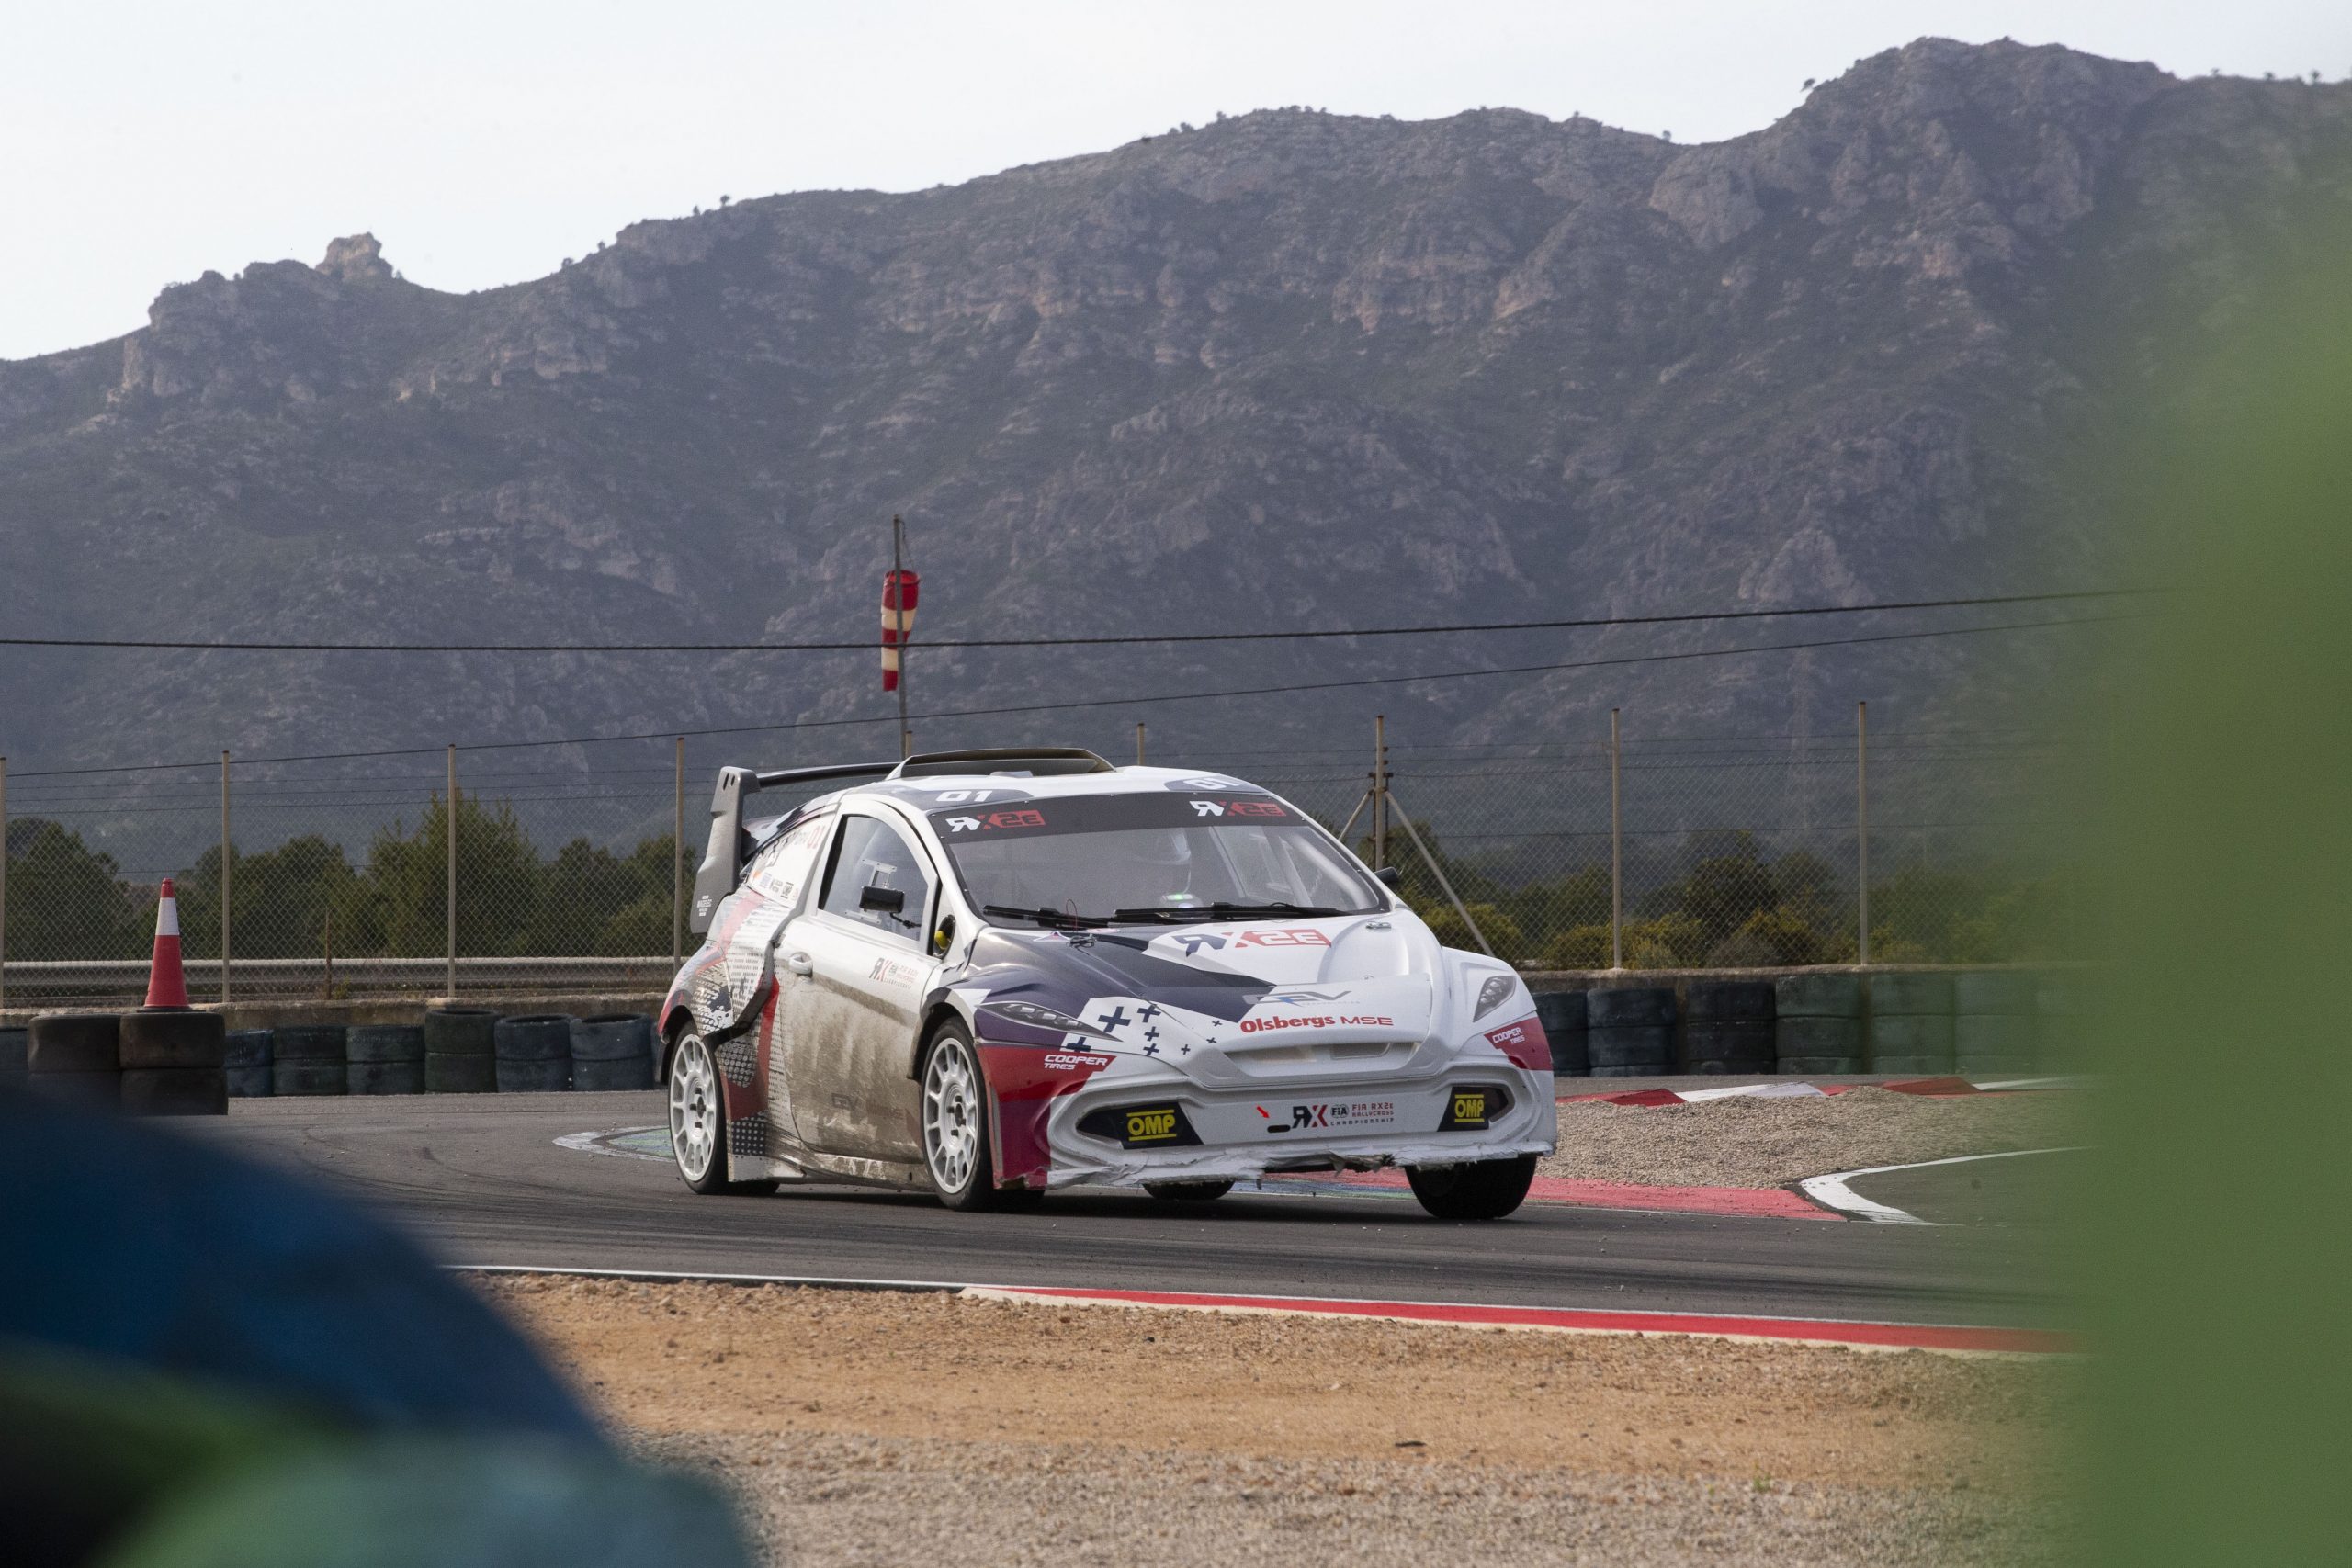 FIA RX2e Championship car receives seal of approval from motorsport big-hitters, QEV